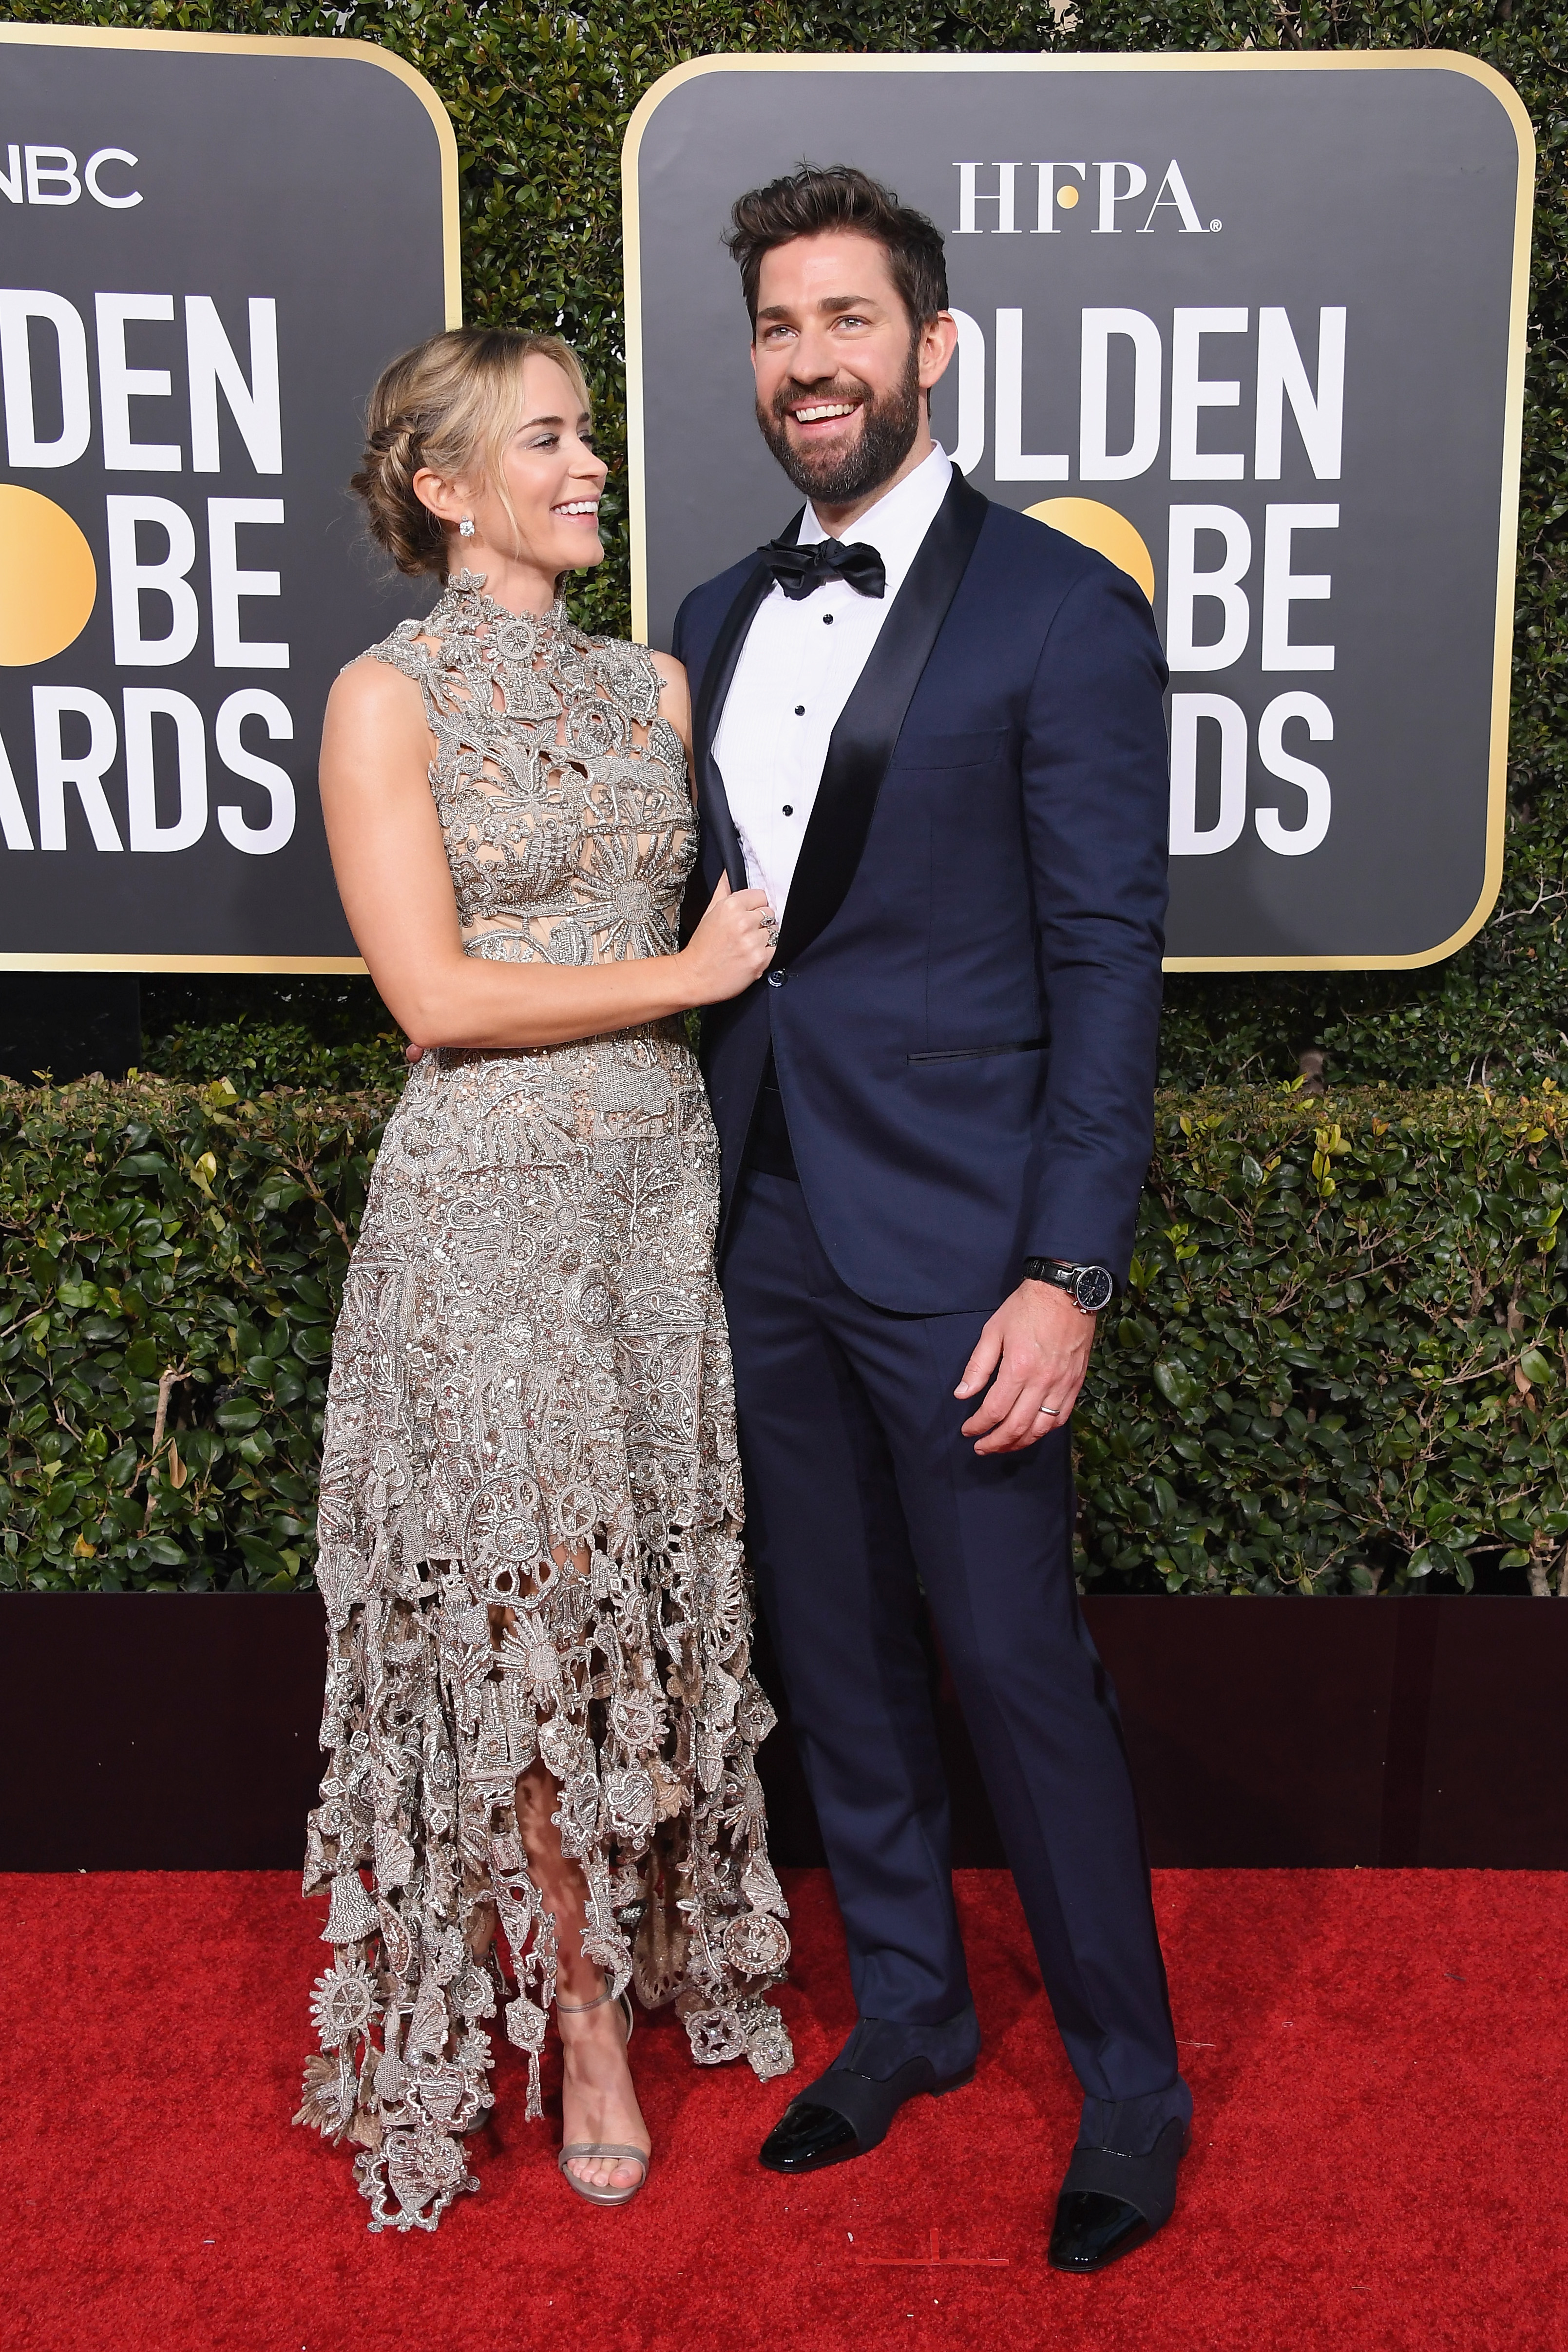 Emily Blunt and John Krasinski attends the 76th Annual Golden Globe Awards at The Beverly Hilton Hotel on January 6, 2019 in Beverly Hills, California.